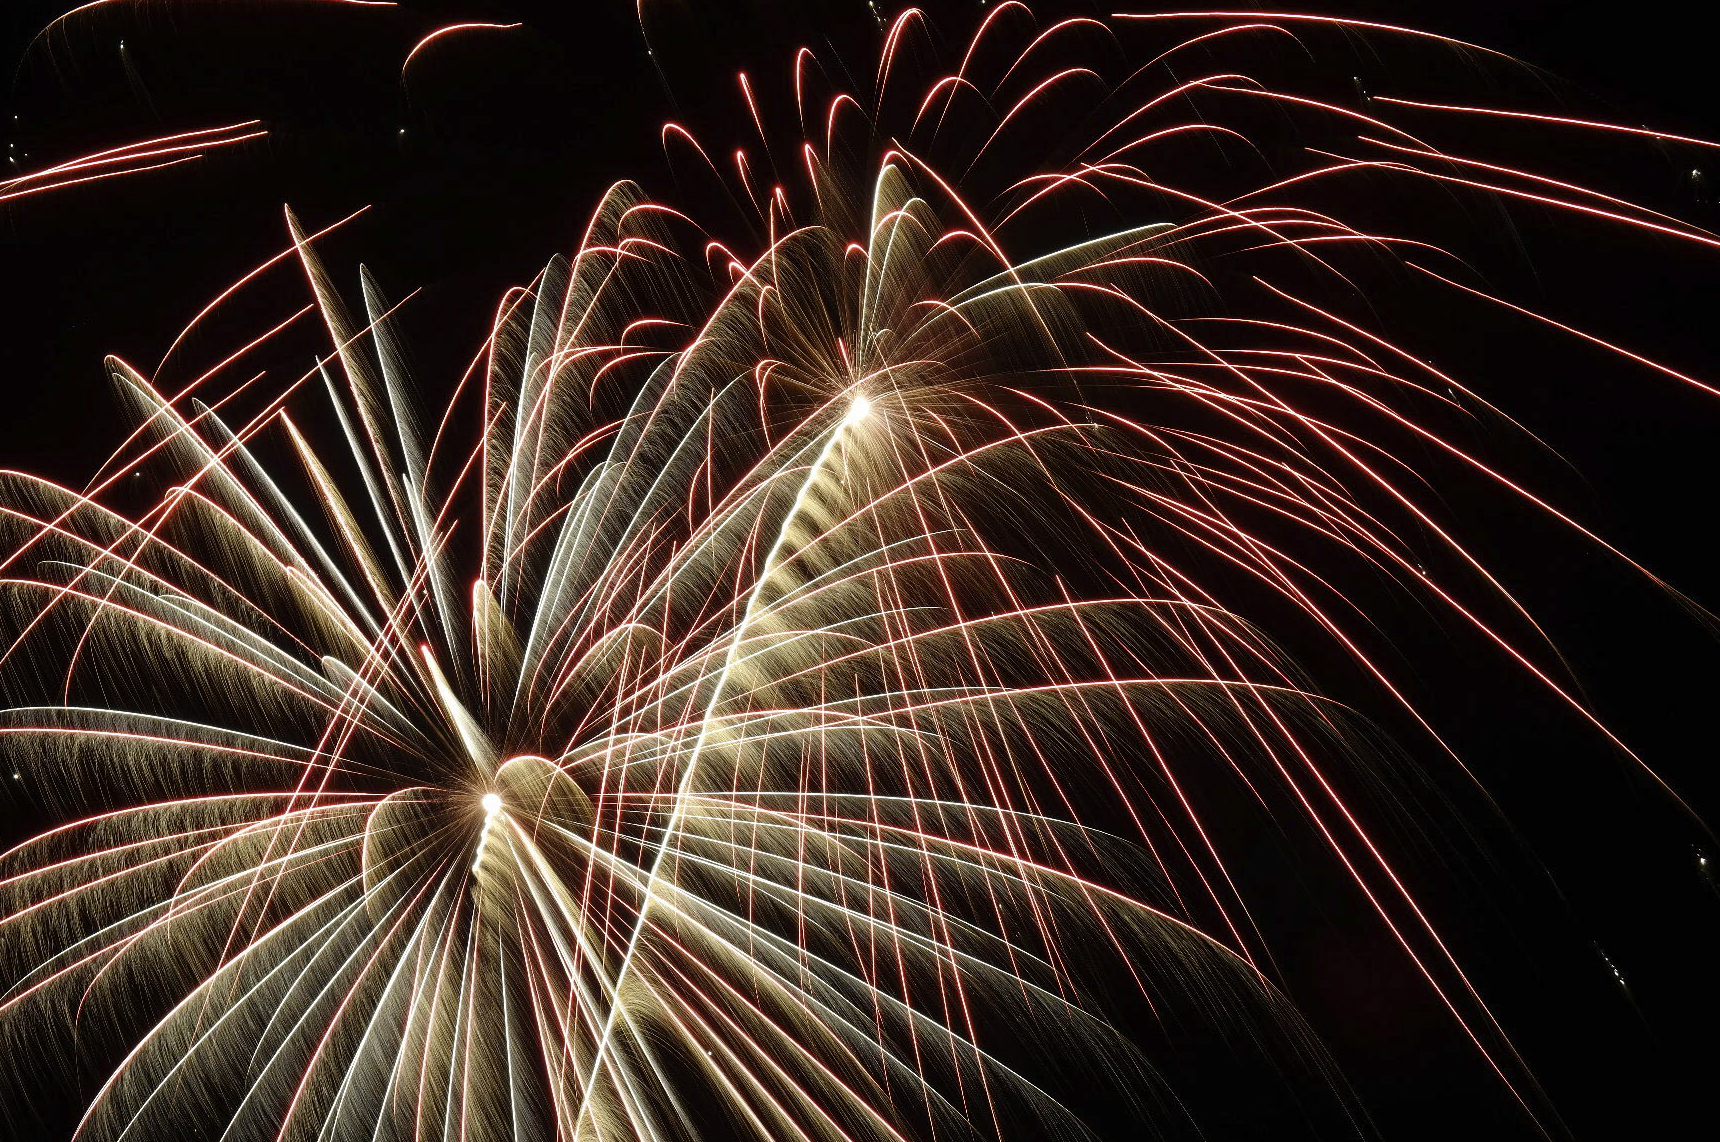 Photographing Fireworks with an iPhone